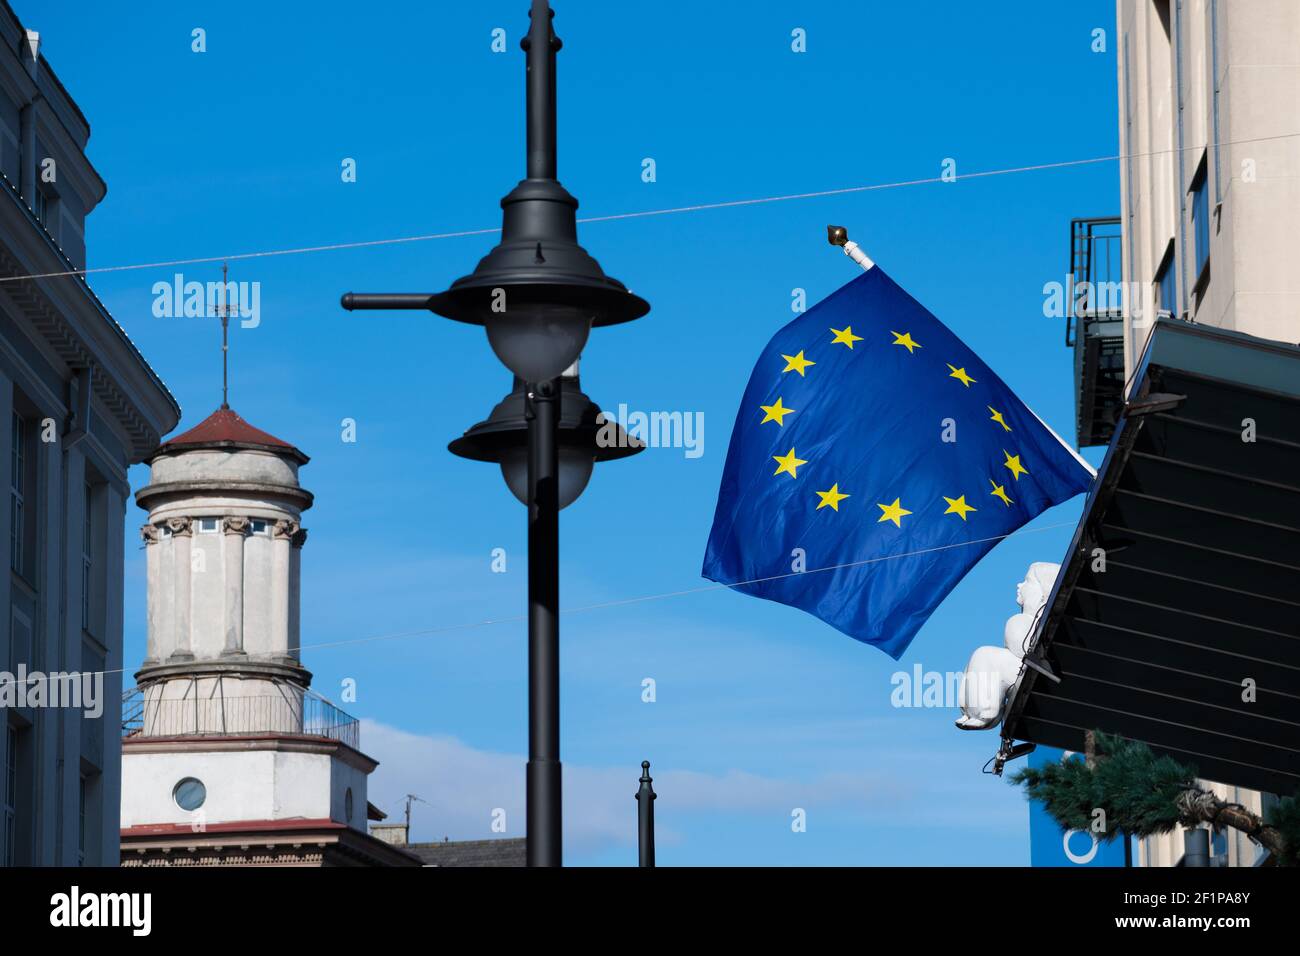 Europe or European Union flag waving, blown by an angel on the roofs of houses Stock Photo